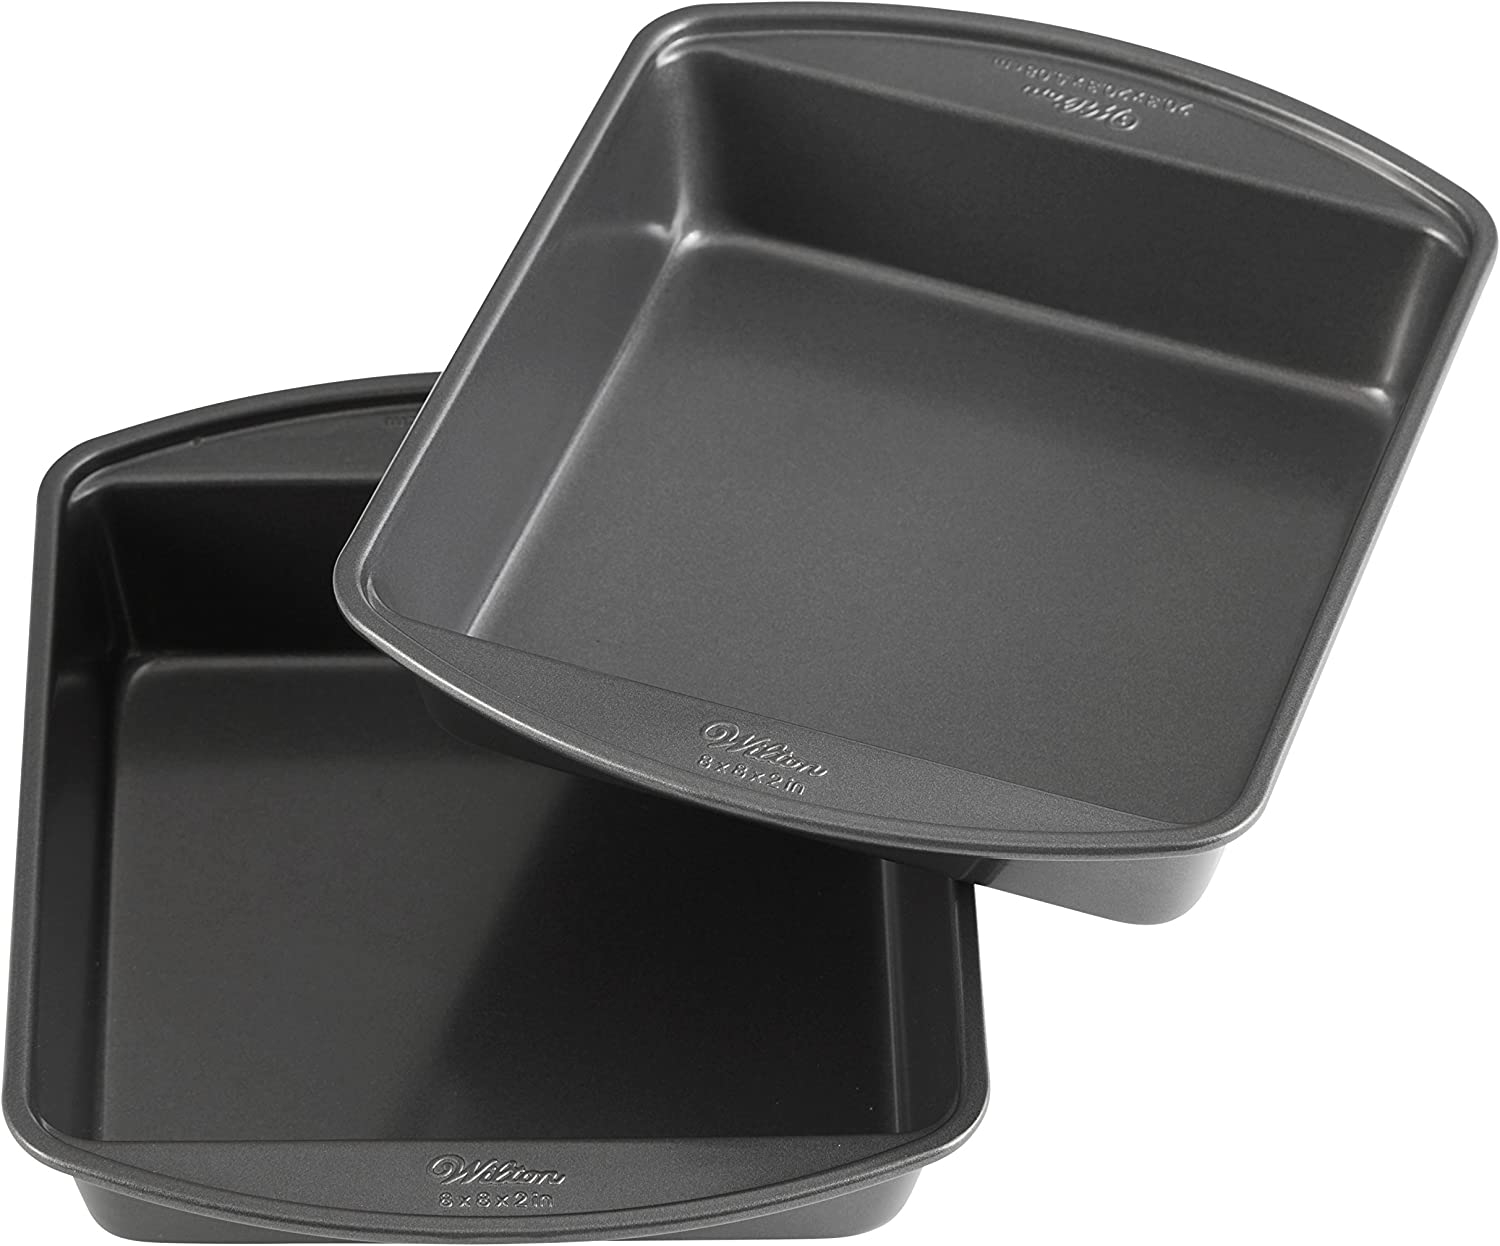 8-Inch Square Pan on Amazon